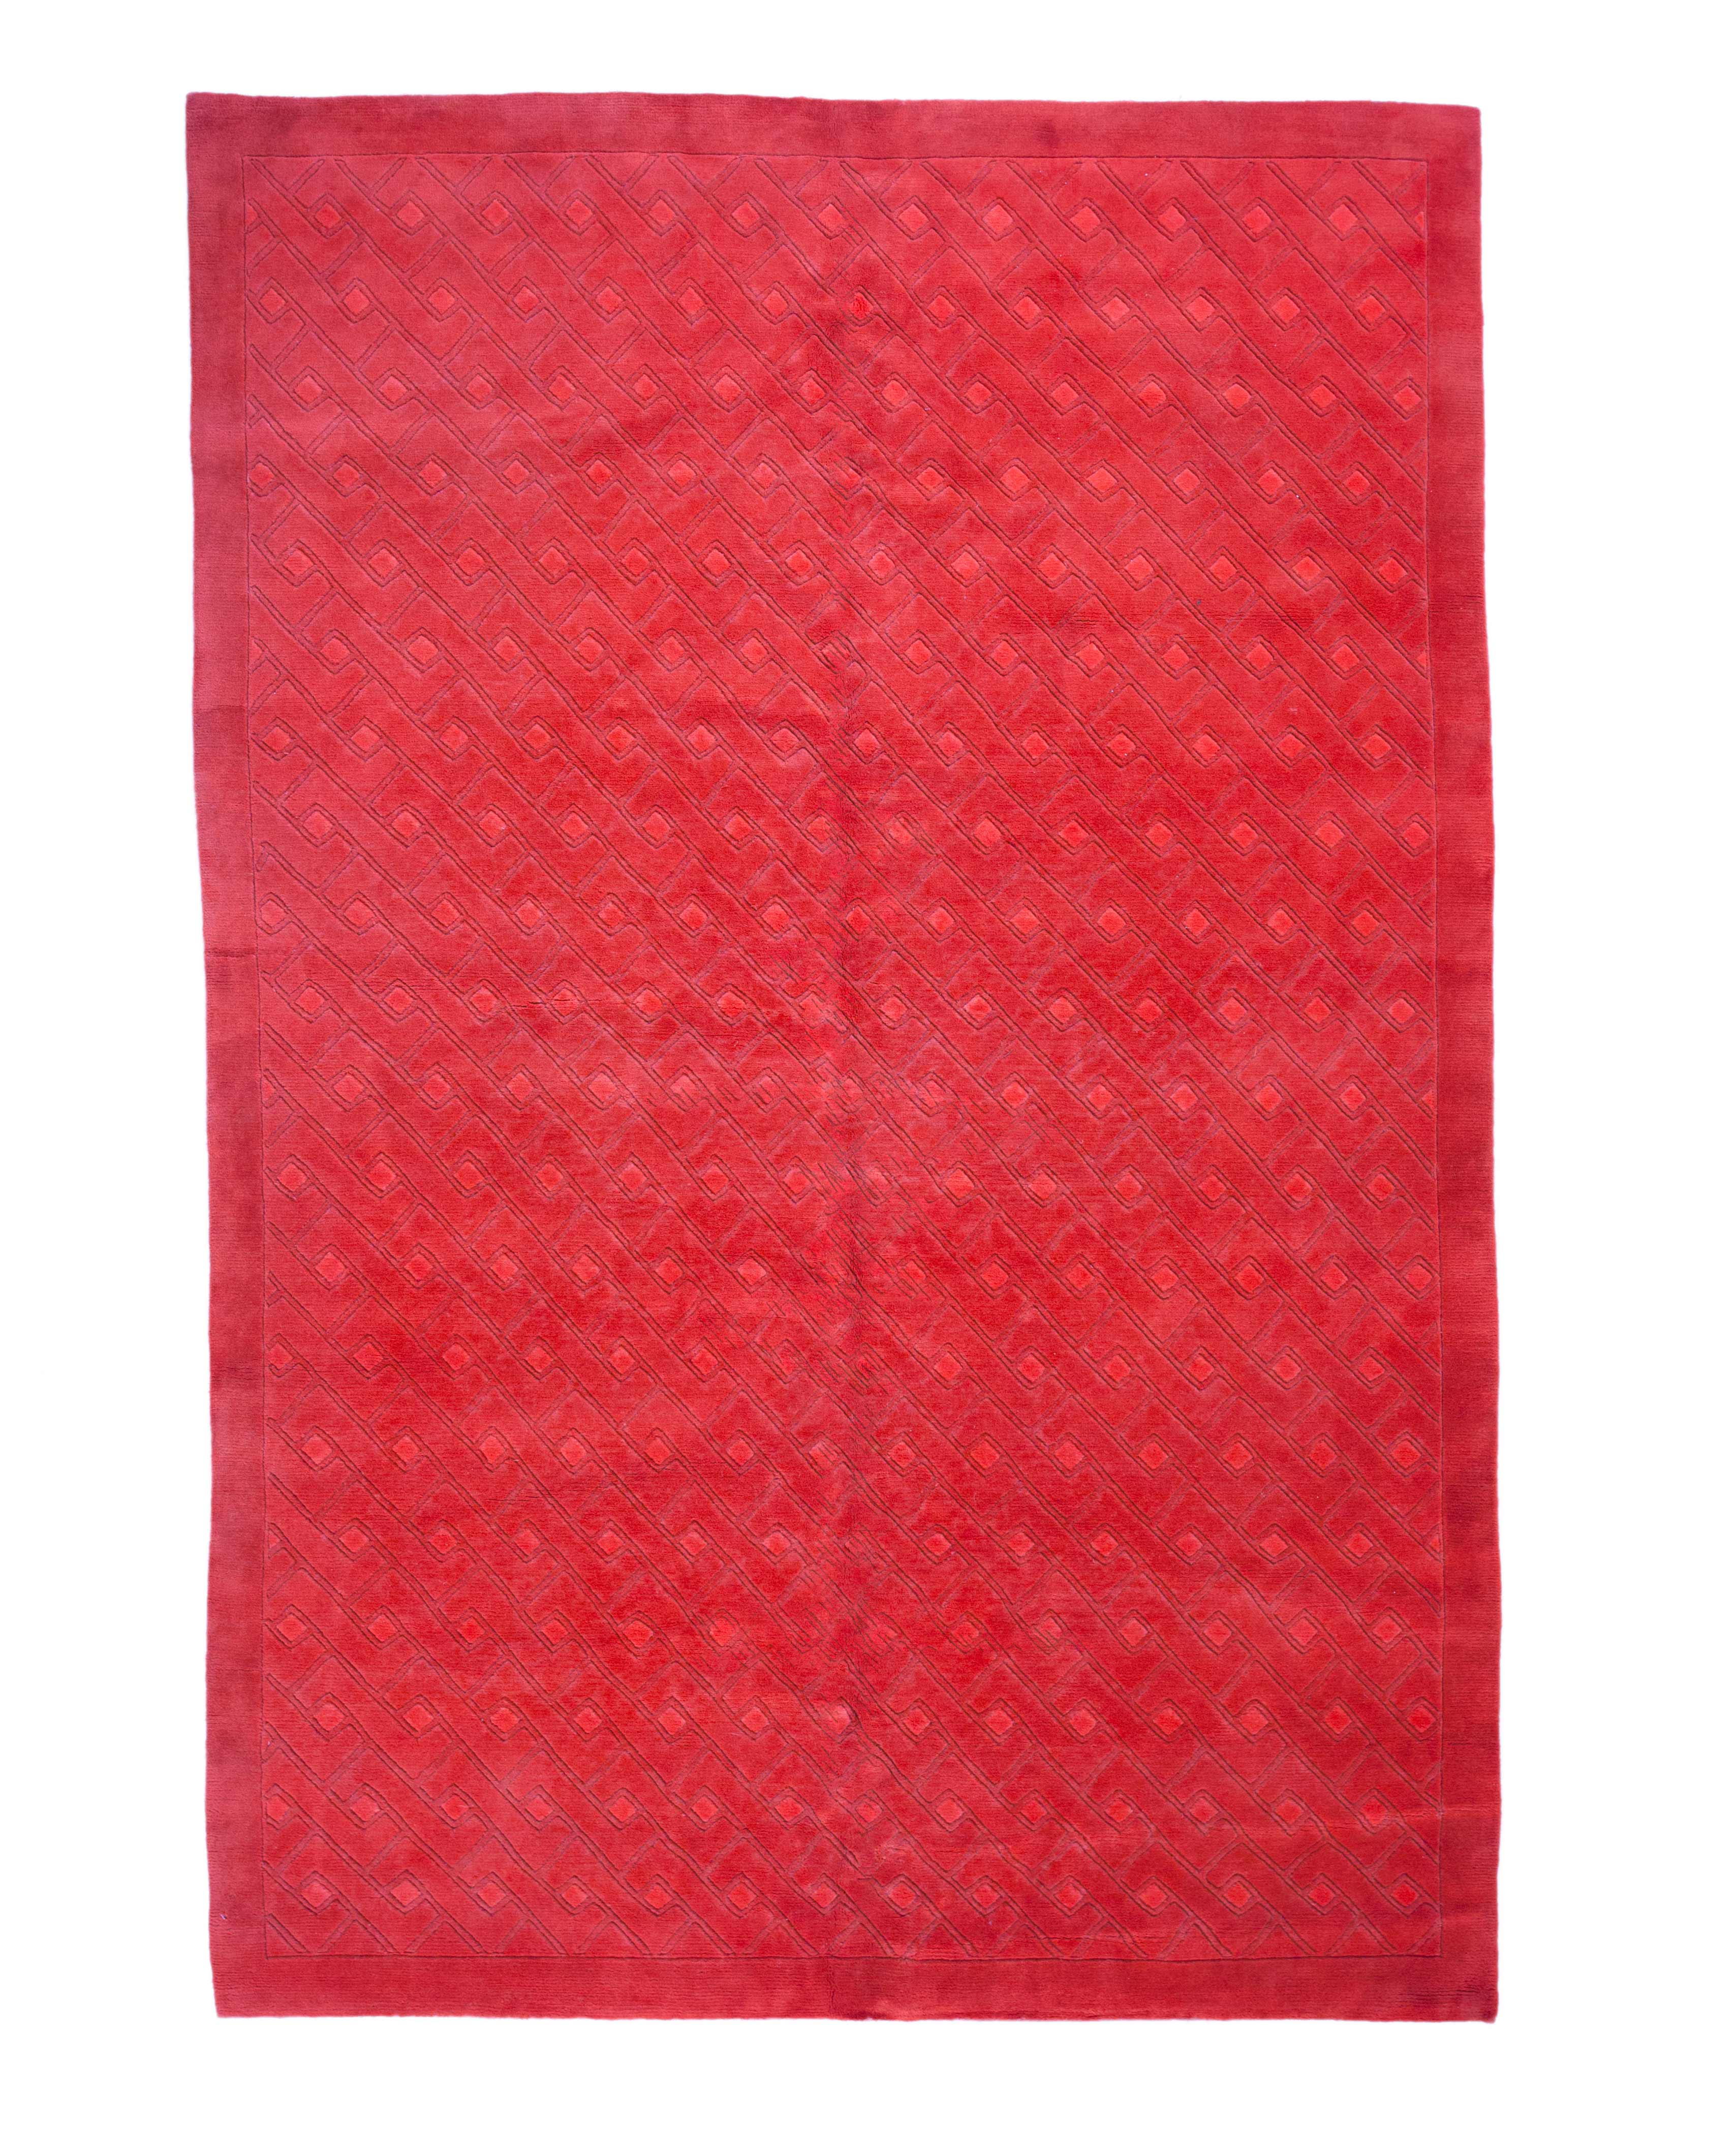 6x9 Overdyed Carved Modern Watermelon Red Rug 1137 - west of hudson